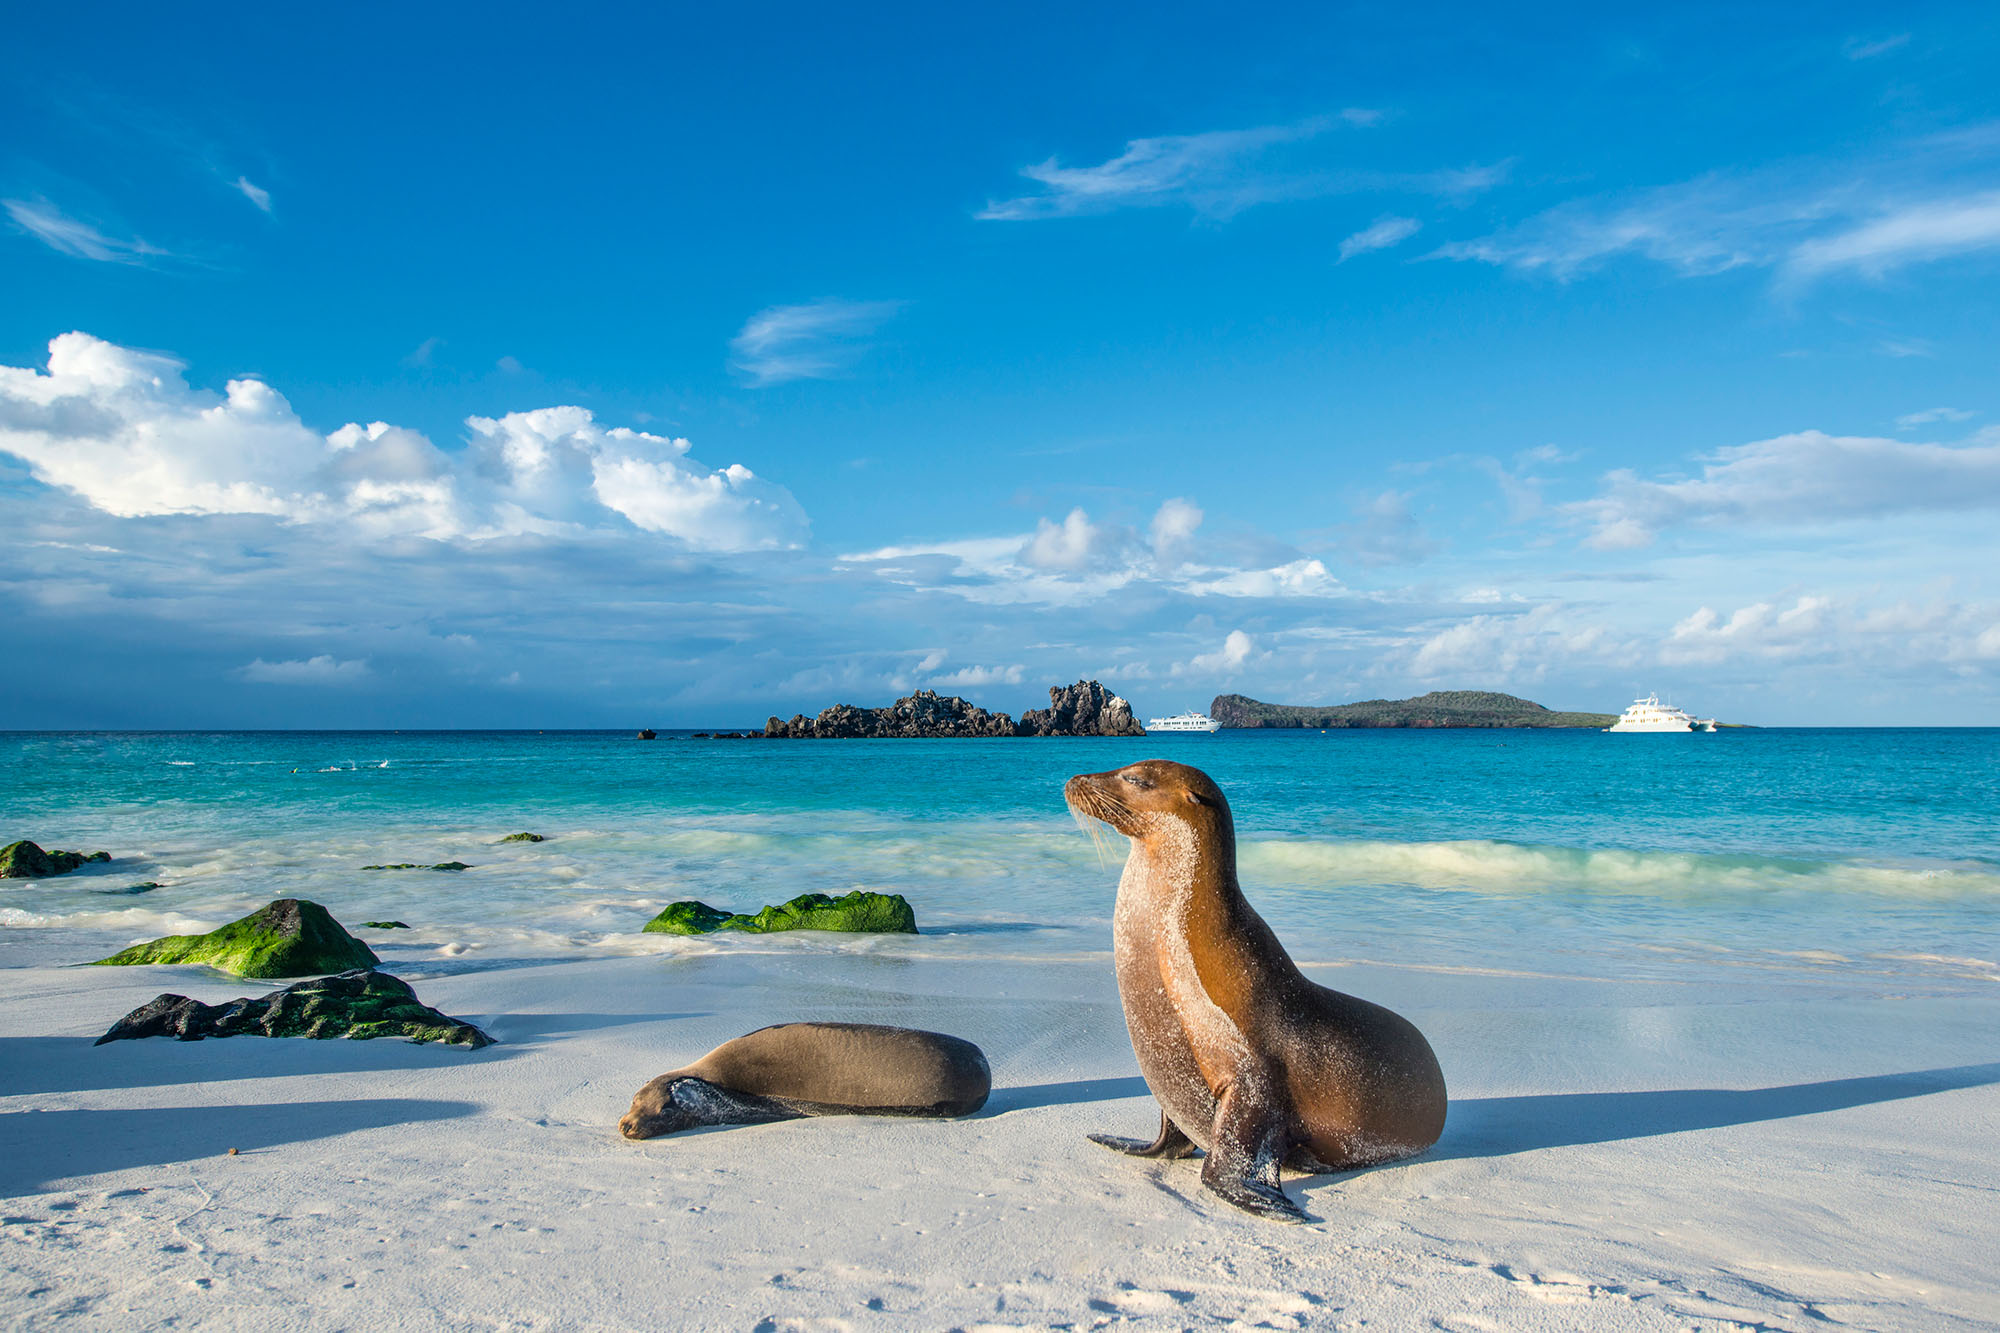 Travel to the Galapagos Islands and Snorkel with Sea Lions